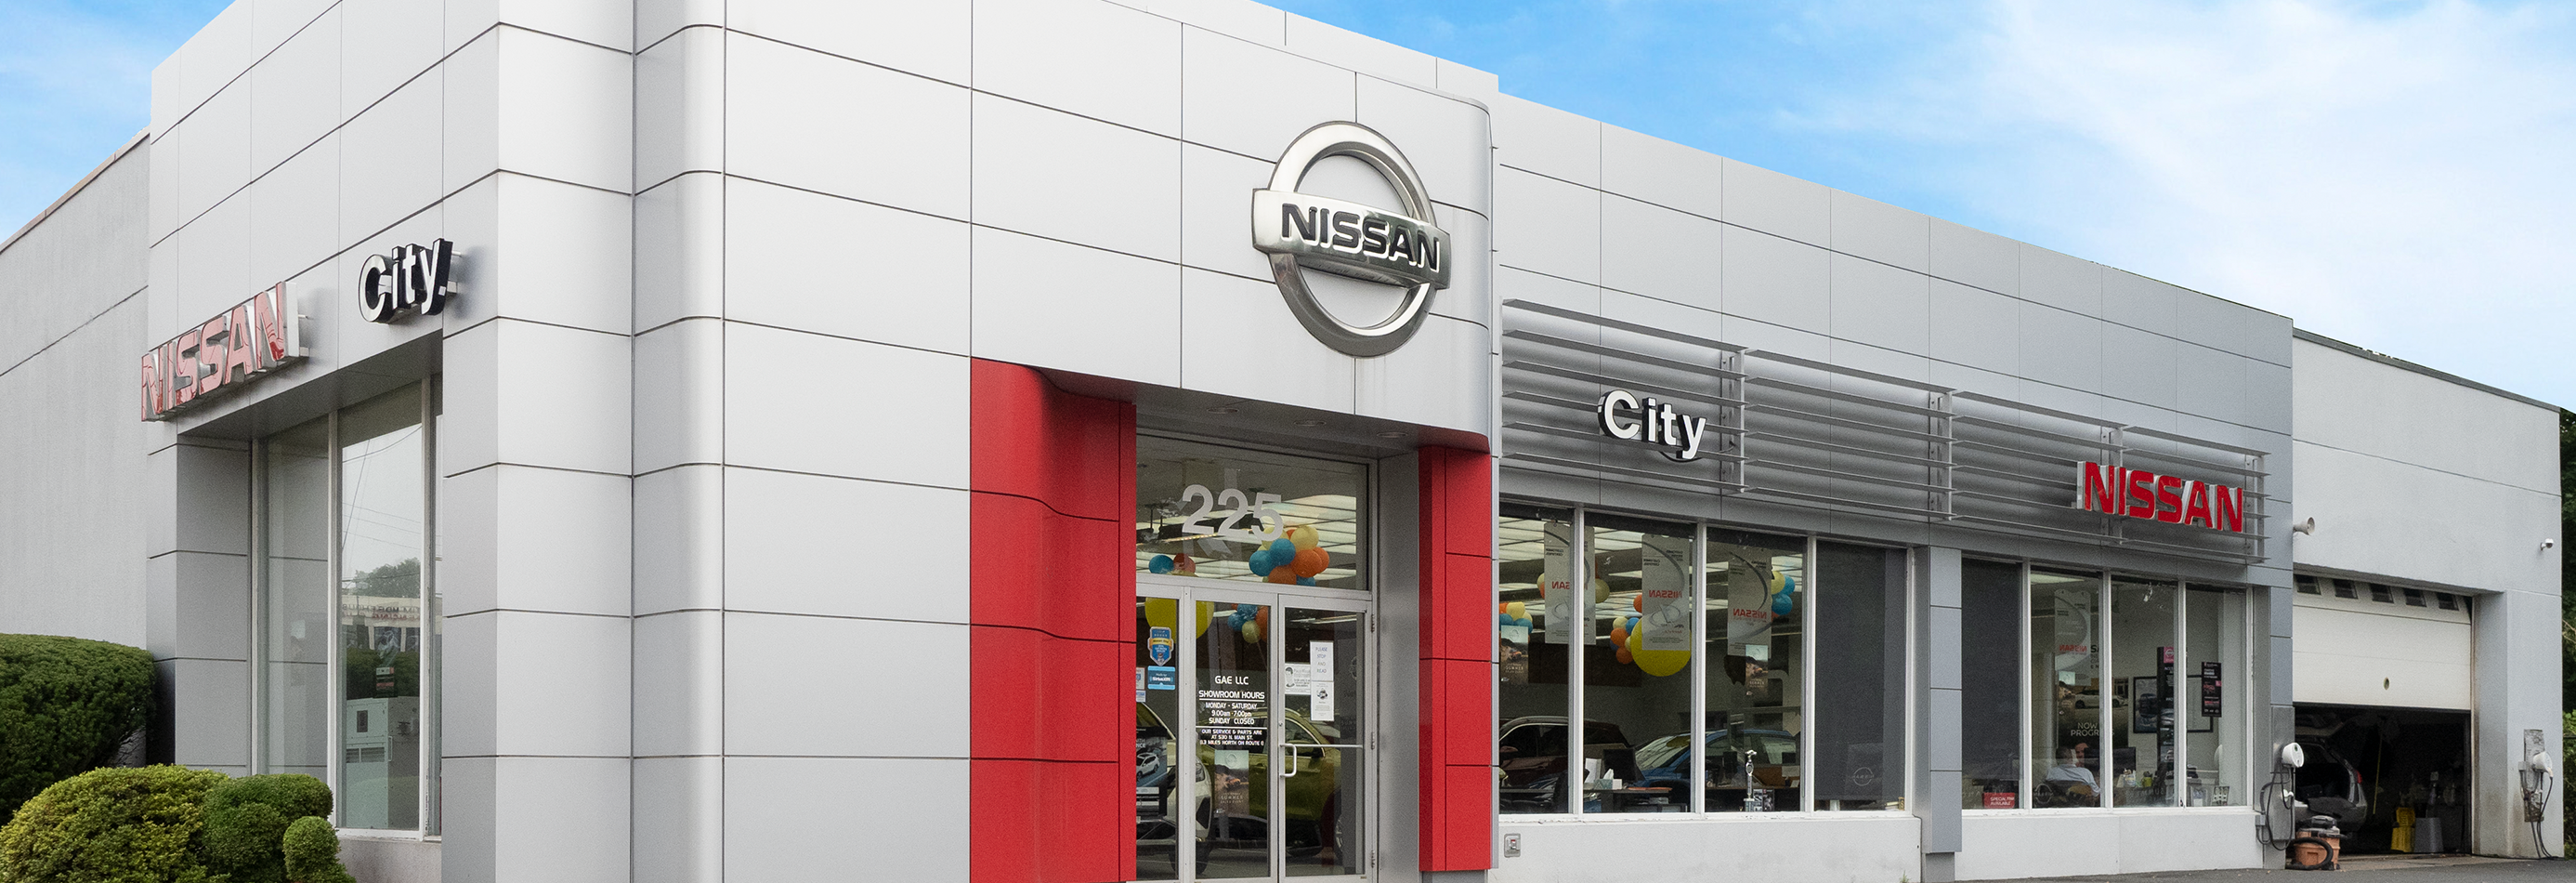 Nissan City serving Port Chester NY